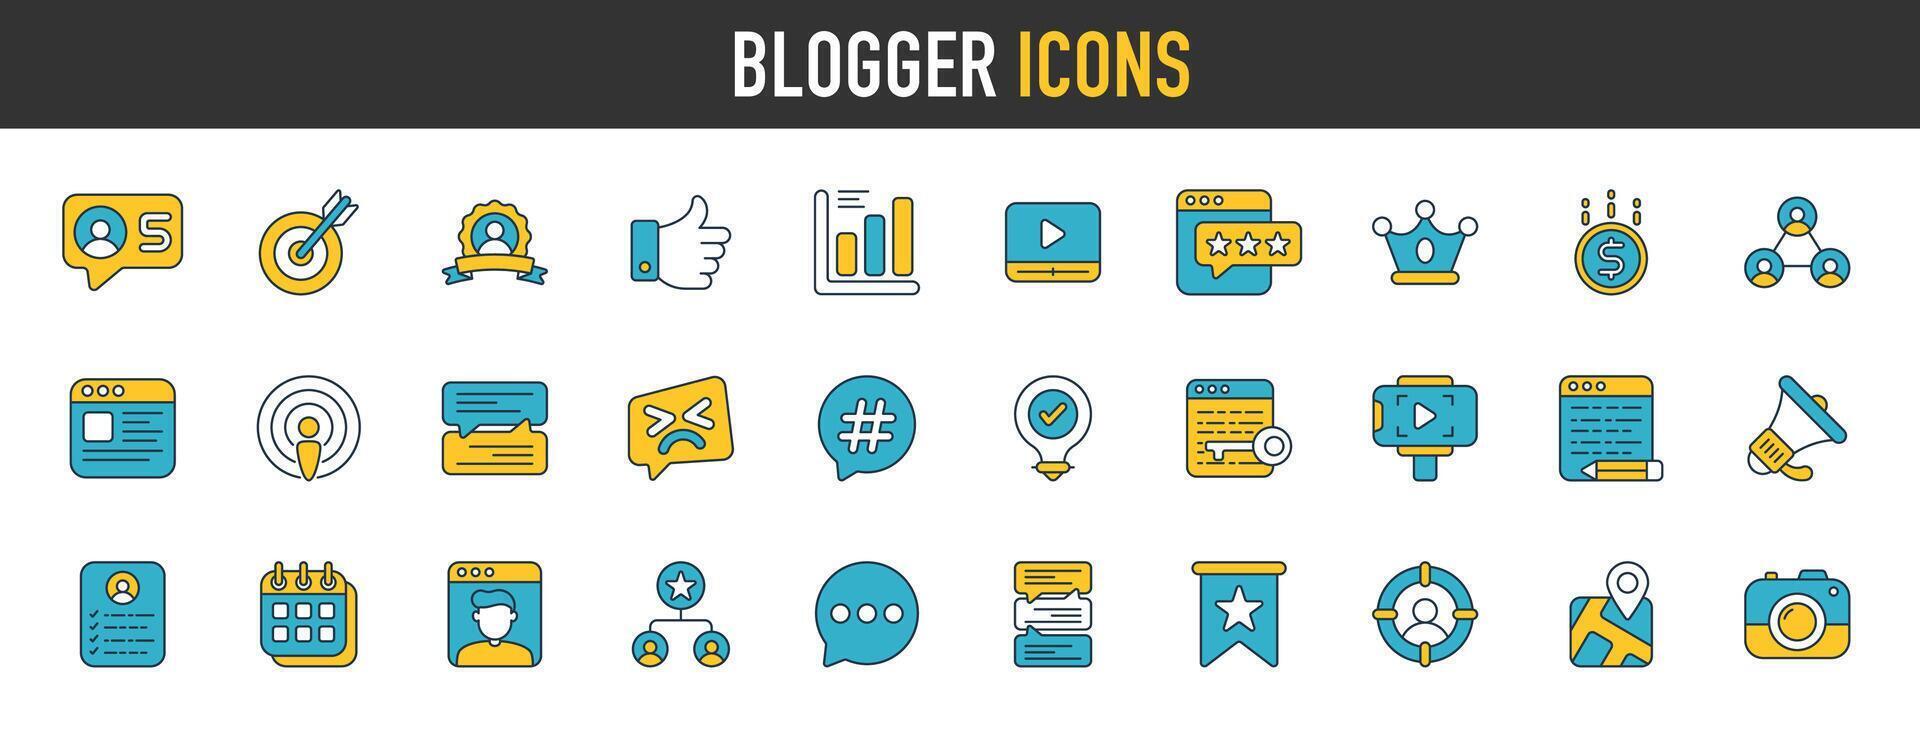 Blogger icons. Data analytics, Management, Message, Website, Blog, Content, Business marketing, Social network and more. Vector illustration